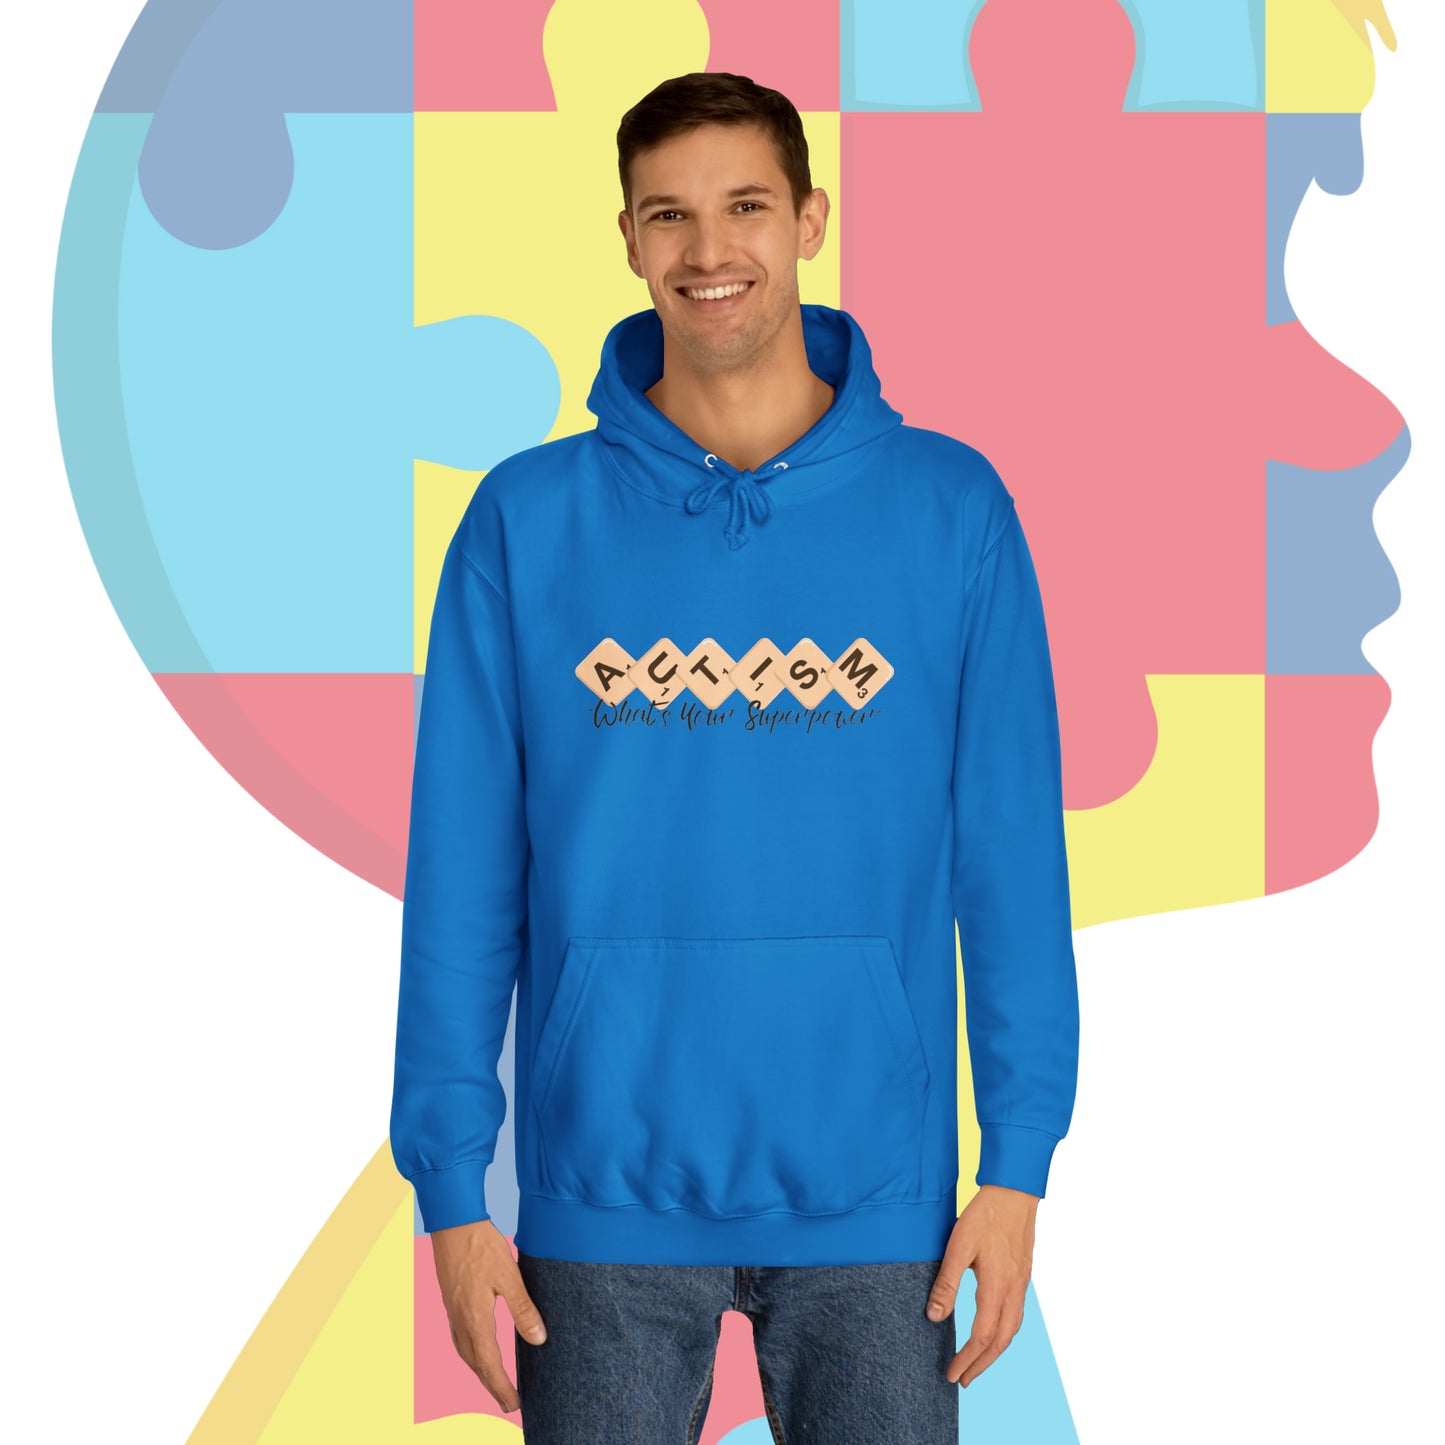 Unisex Autism Awareness "What's your Superpower" Hoodie